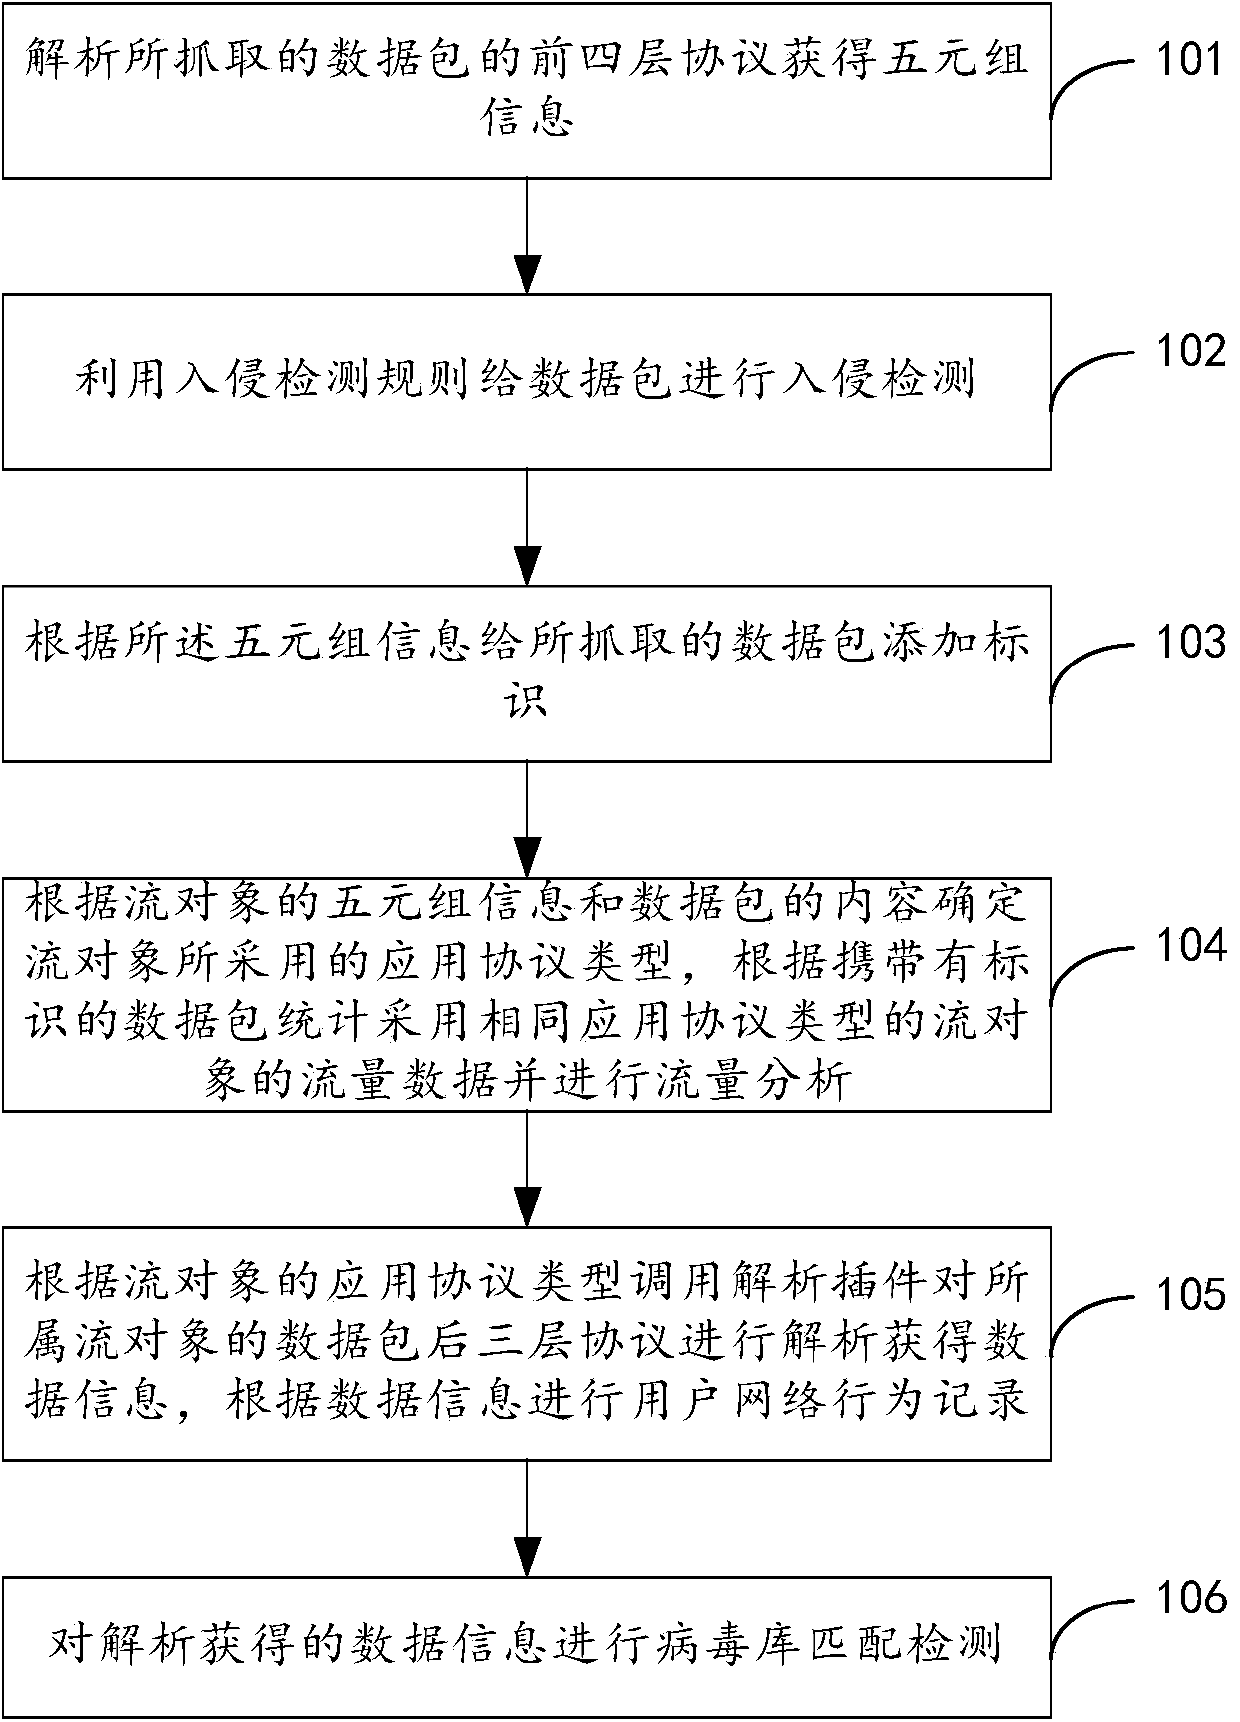 Network security detection method and system